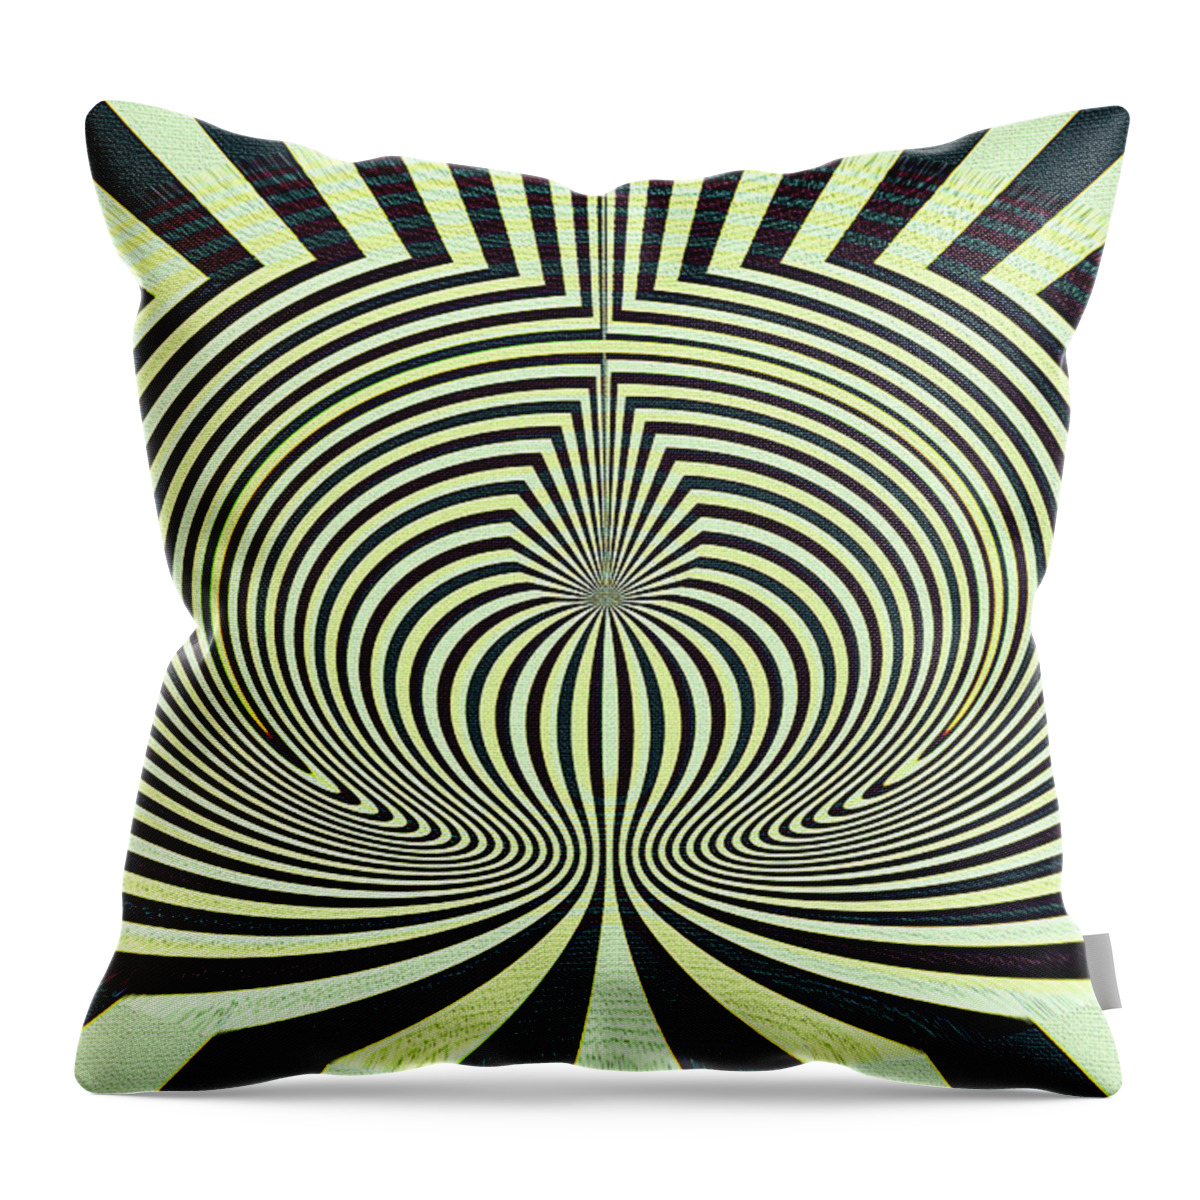 Tom Stanley Janca Abstract #2930 Throw Pillow featuring the digital art Tom Stanley Janca Abstract #2930,ps1def by Tom Janca